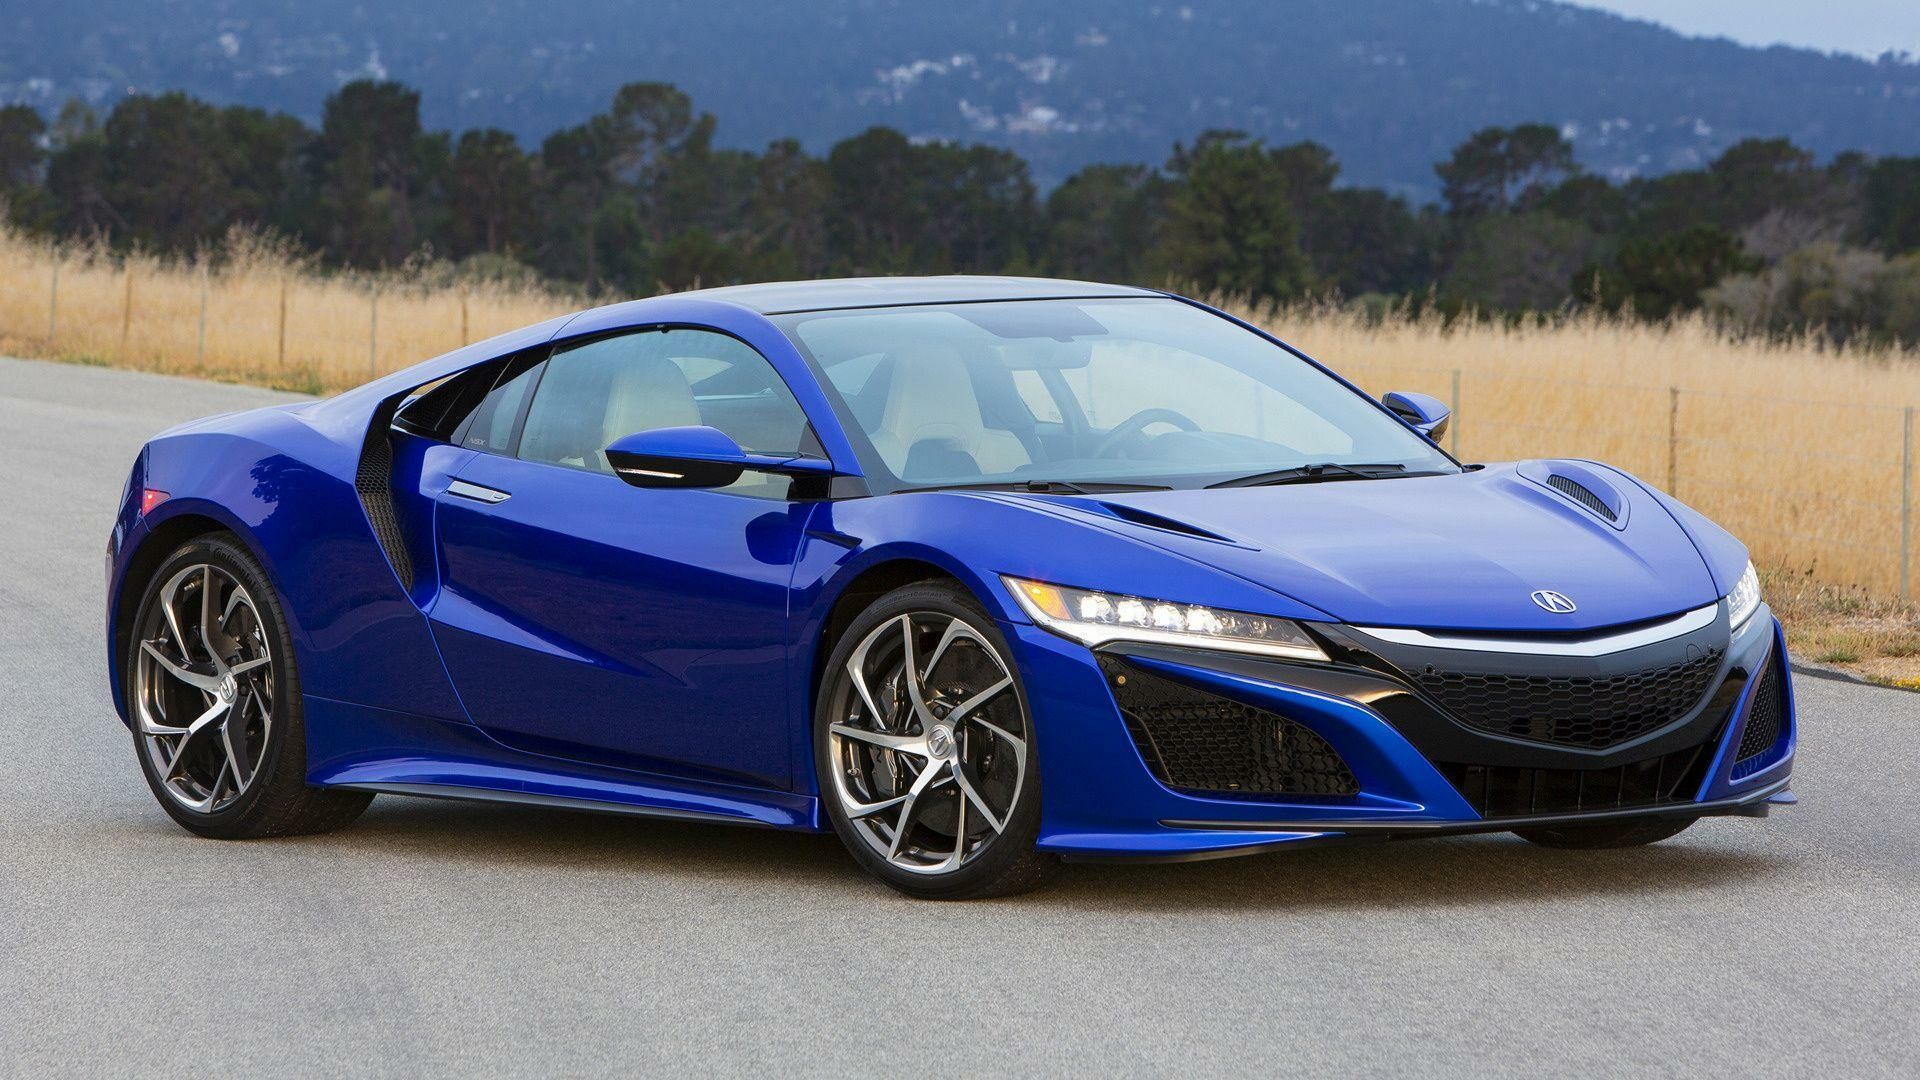 Acura: The first luxury division established by a Japanese automaker, NSX. 1920x1080 Full HD Wallpaper.